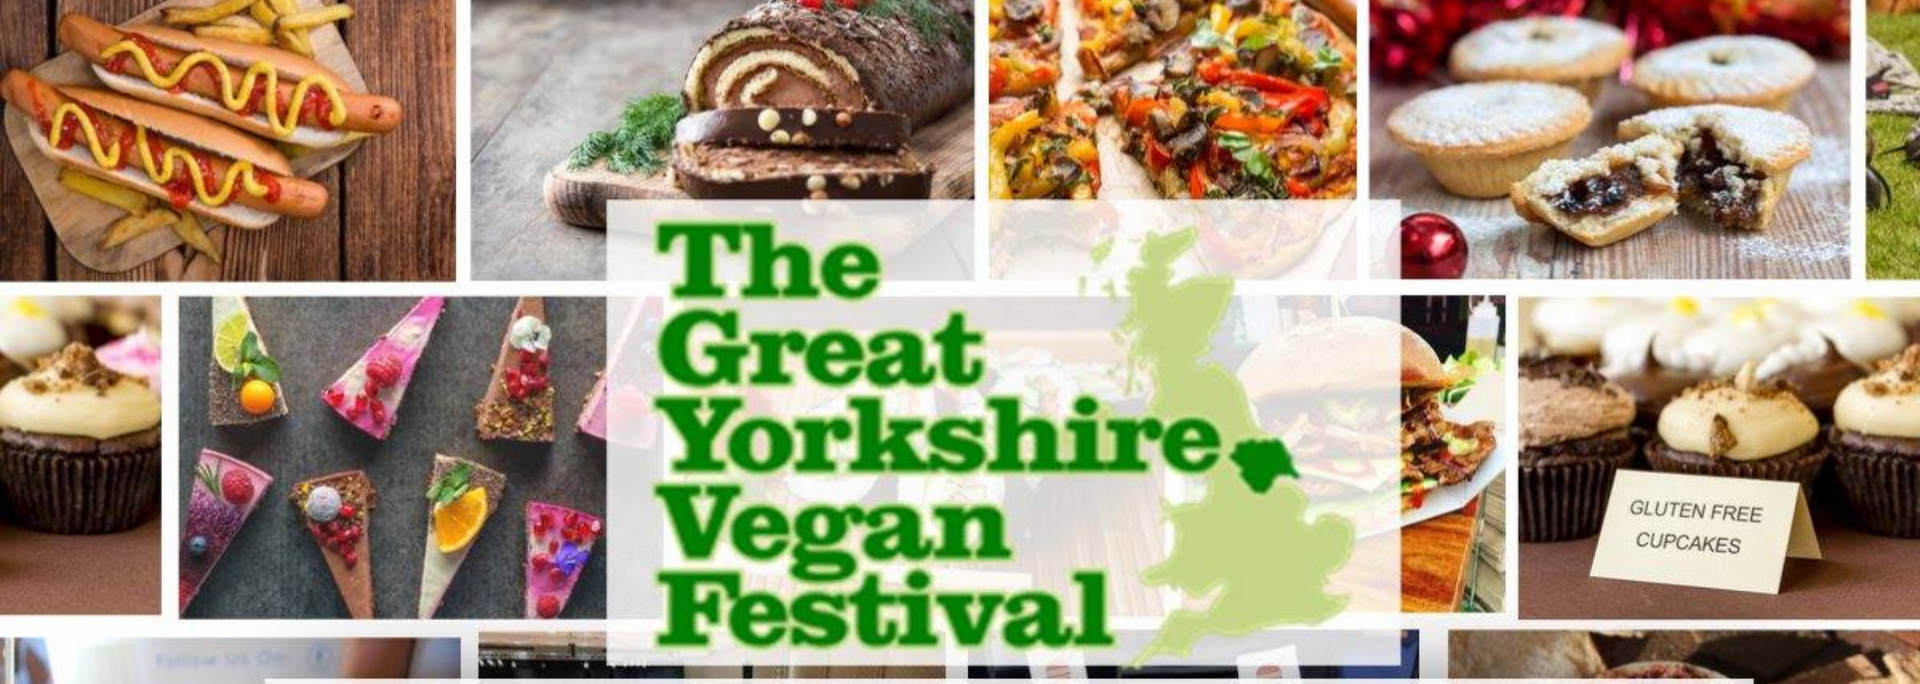 Picture of the Great Yorkshire Vegan Festival.
